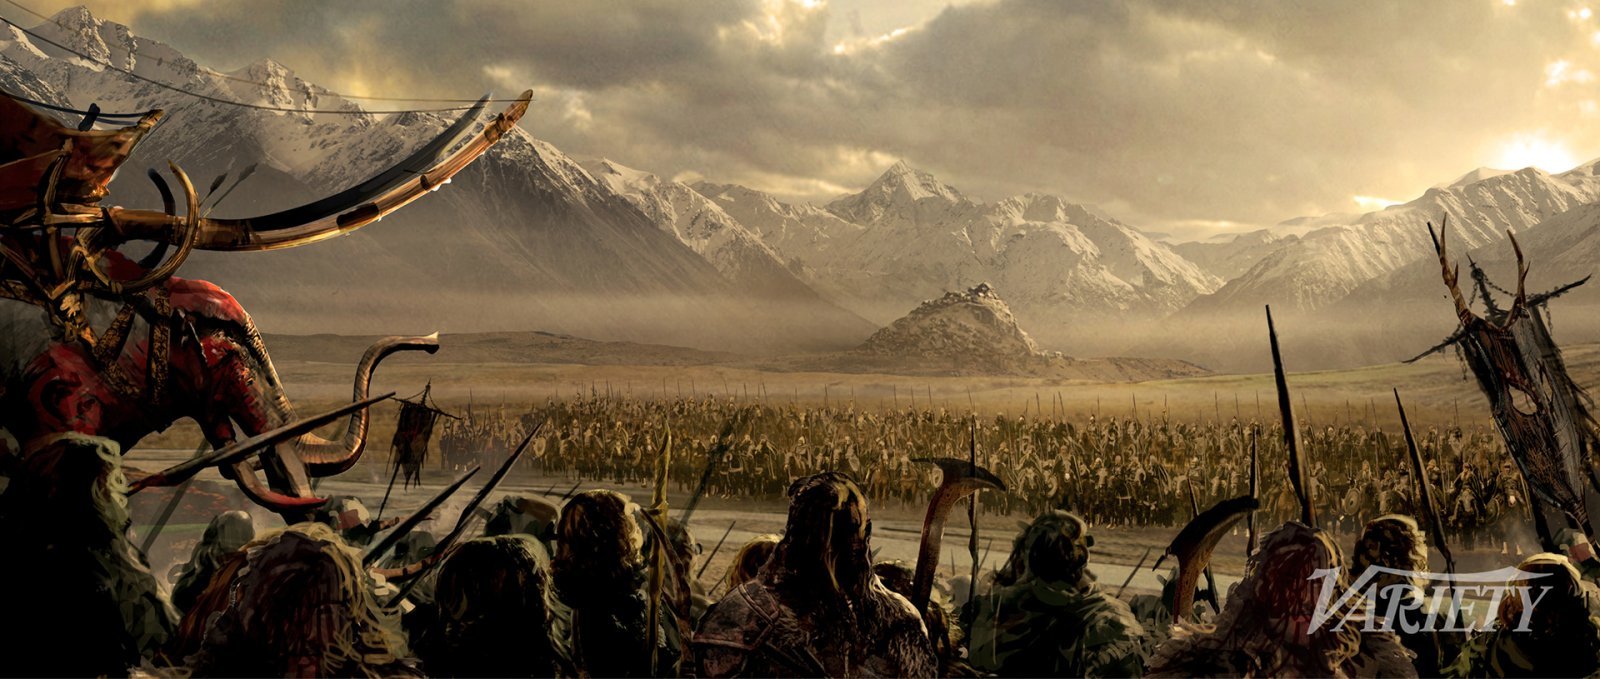 The Lord of the Rings The War of the Rohirrim